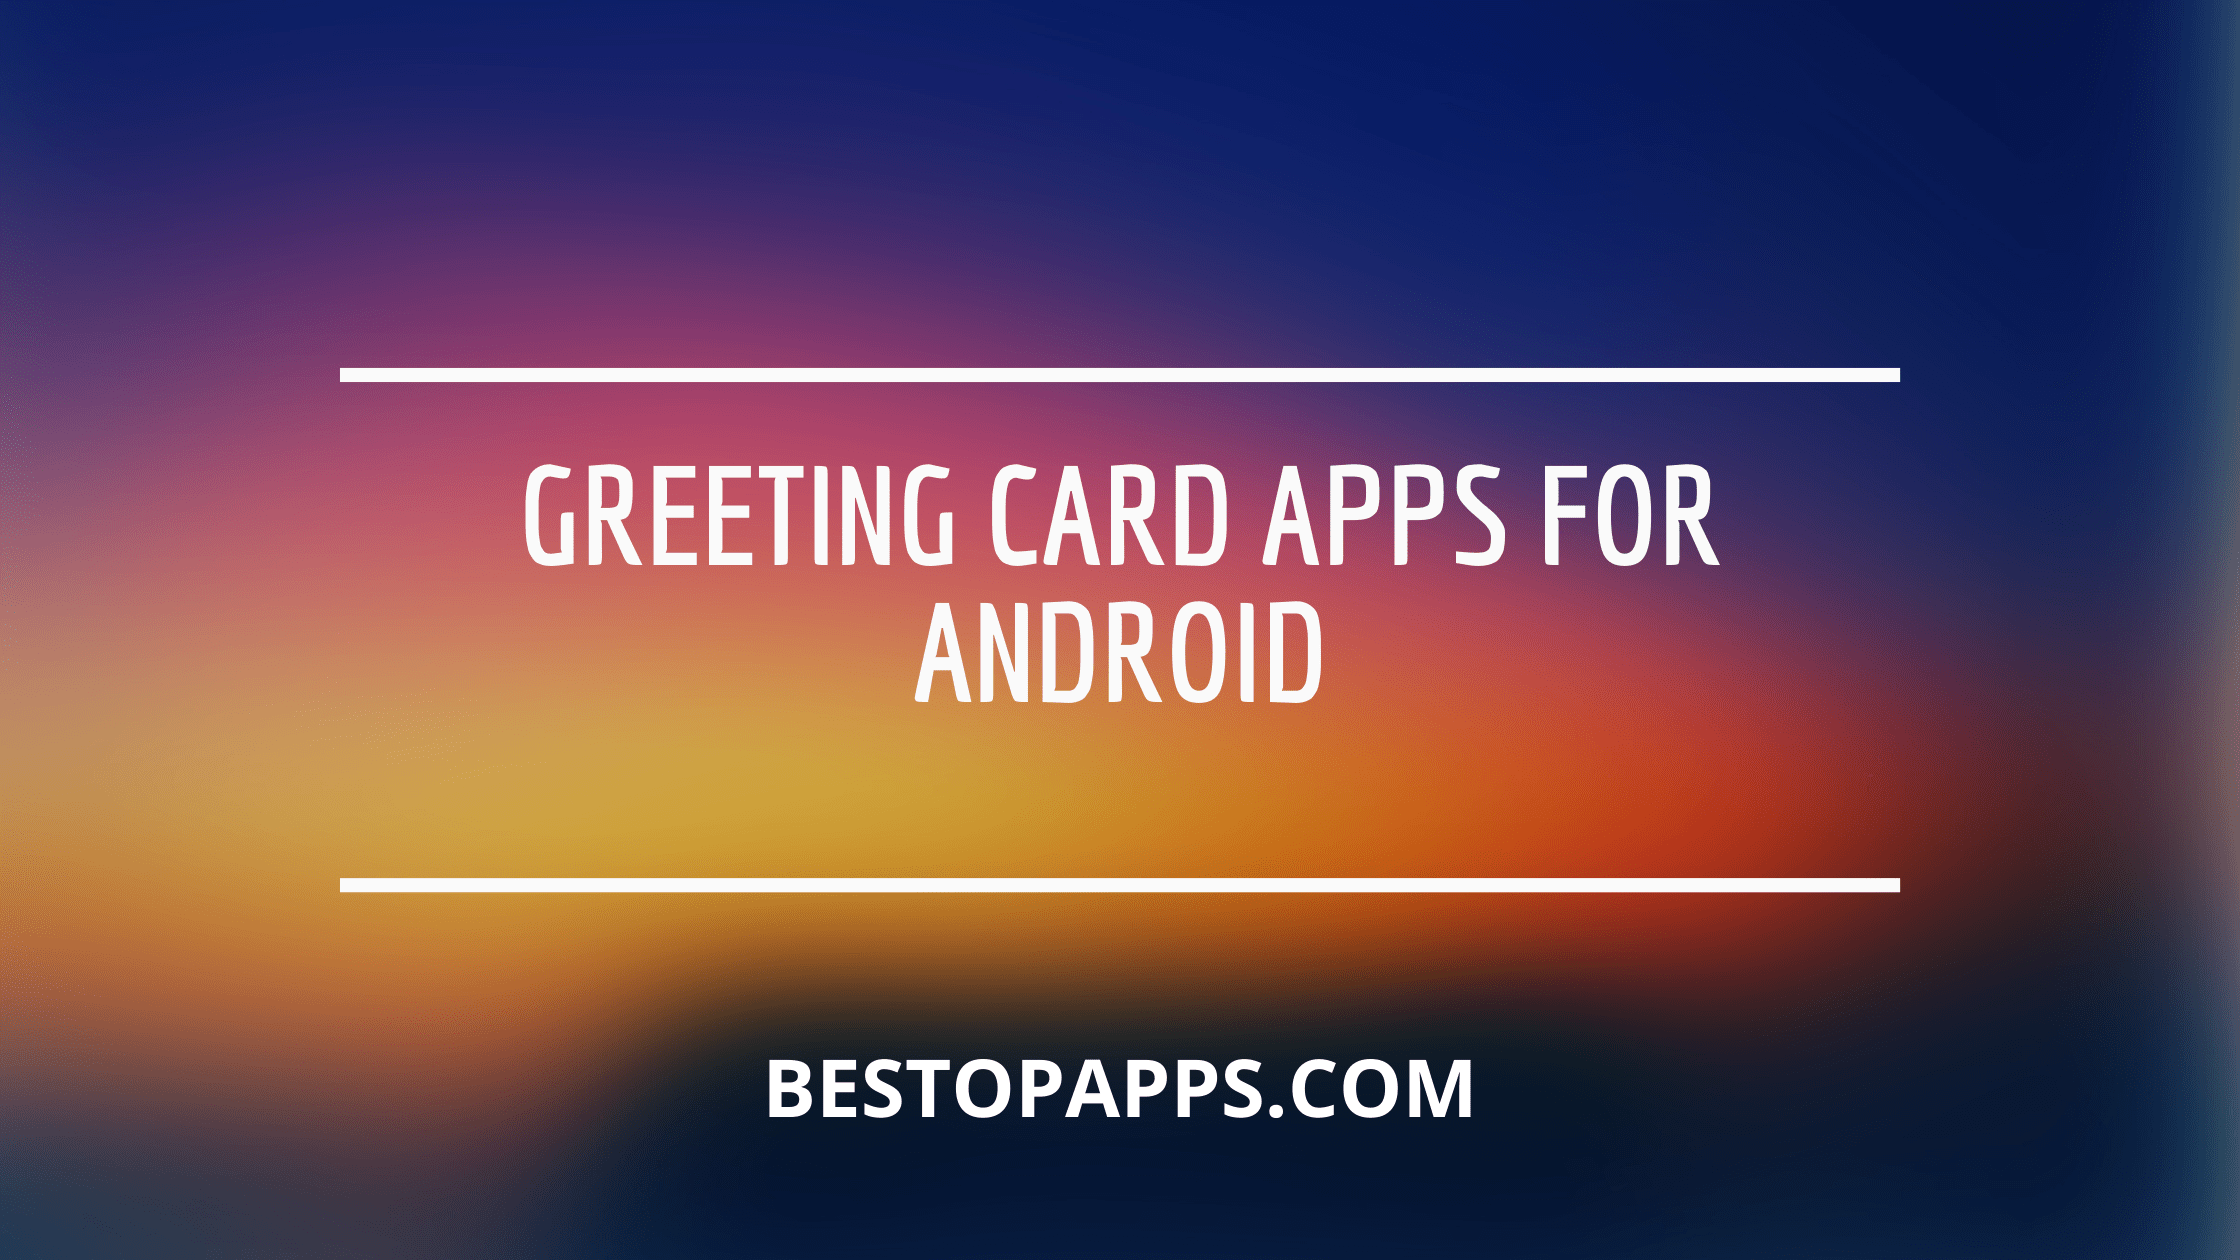 Greeting card apps for android